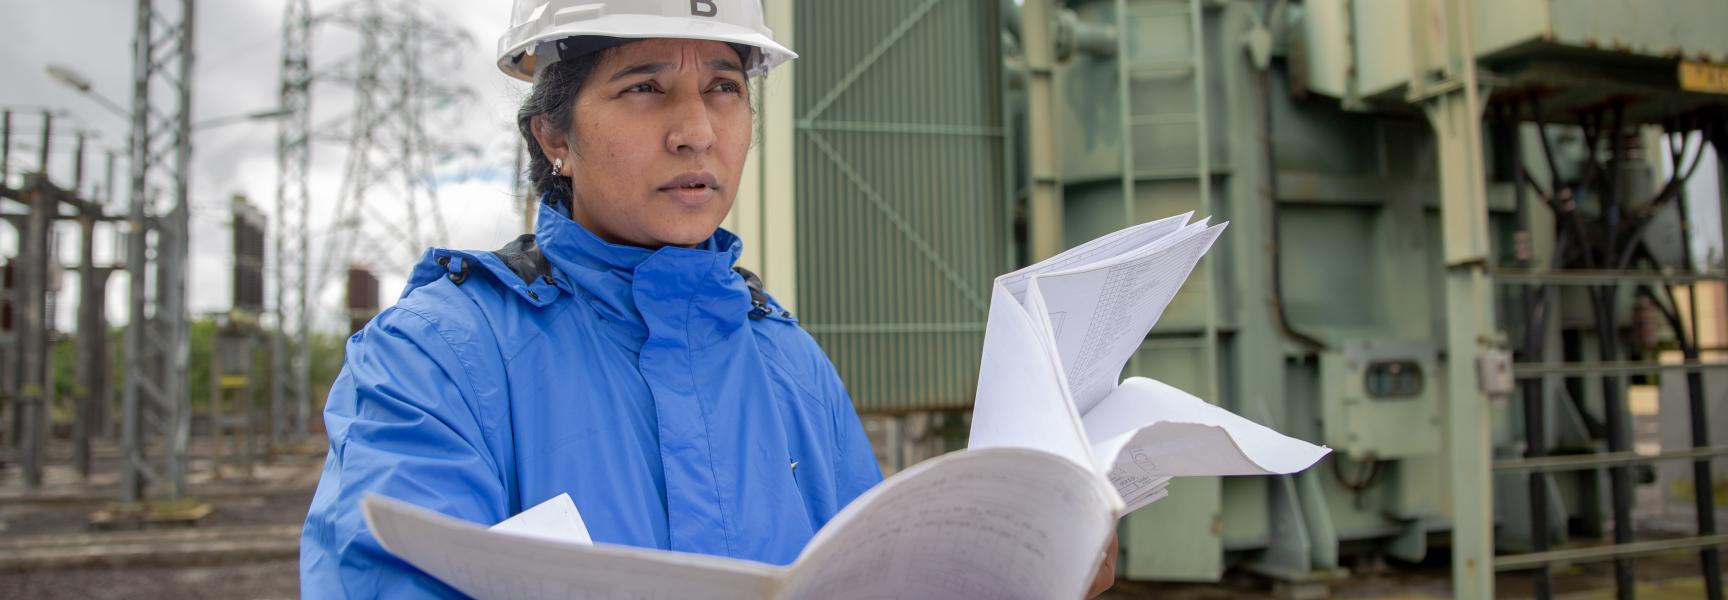 Woman engineer at CEB power station in Mauritius, 2020